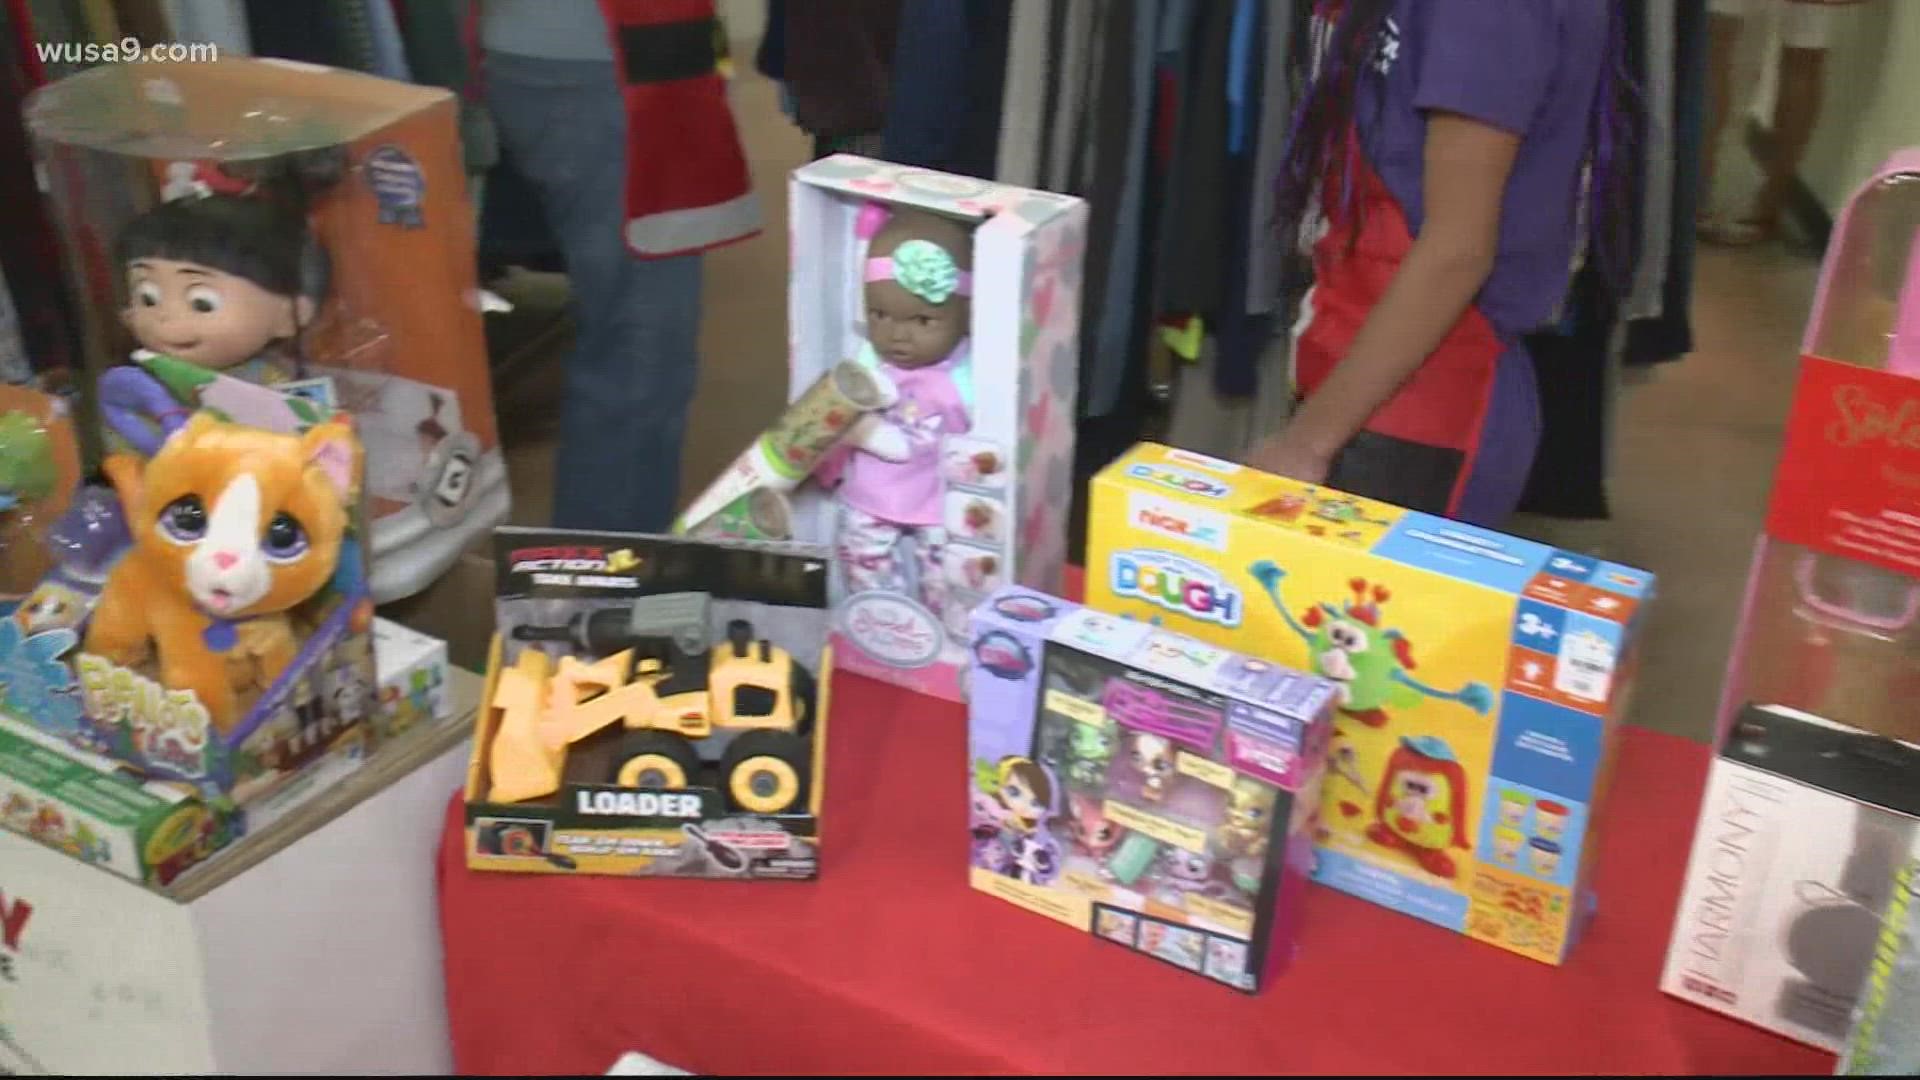 The nonprofit hopes to collect 4,000 toys ahead of the holidays.